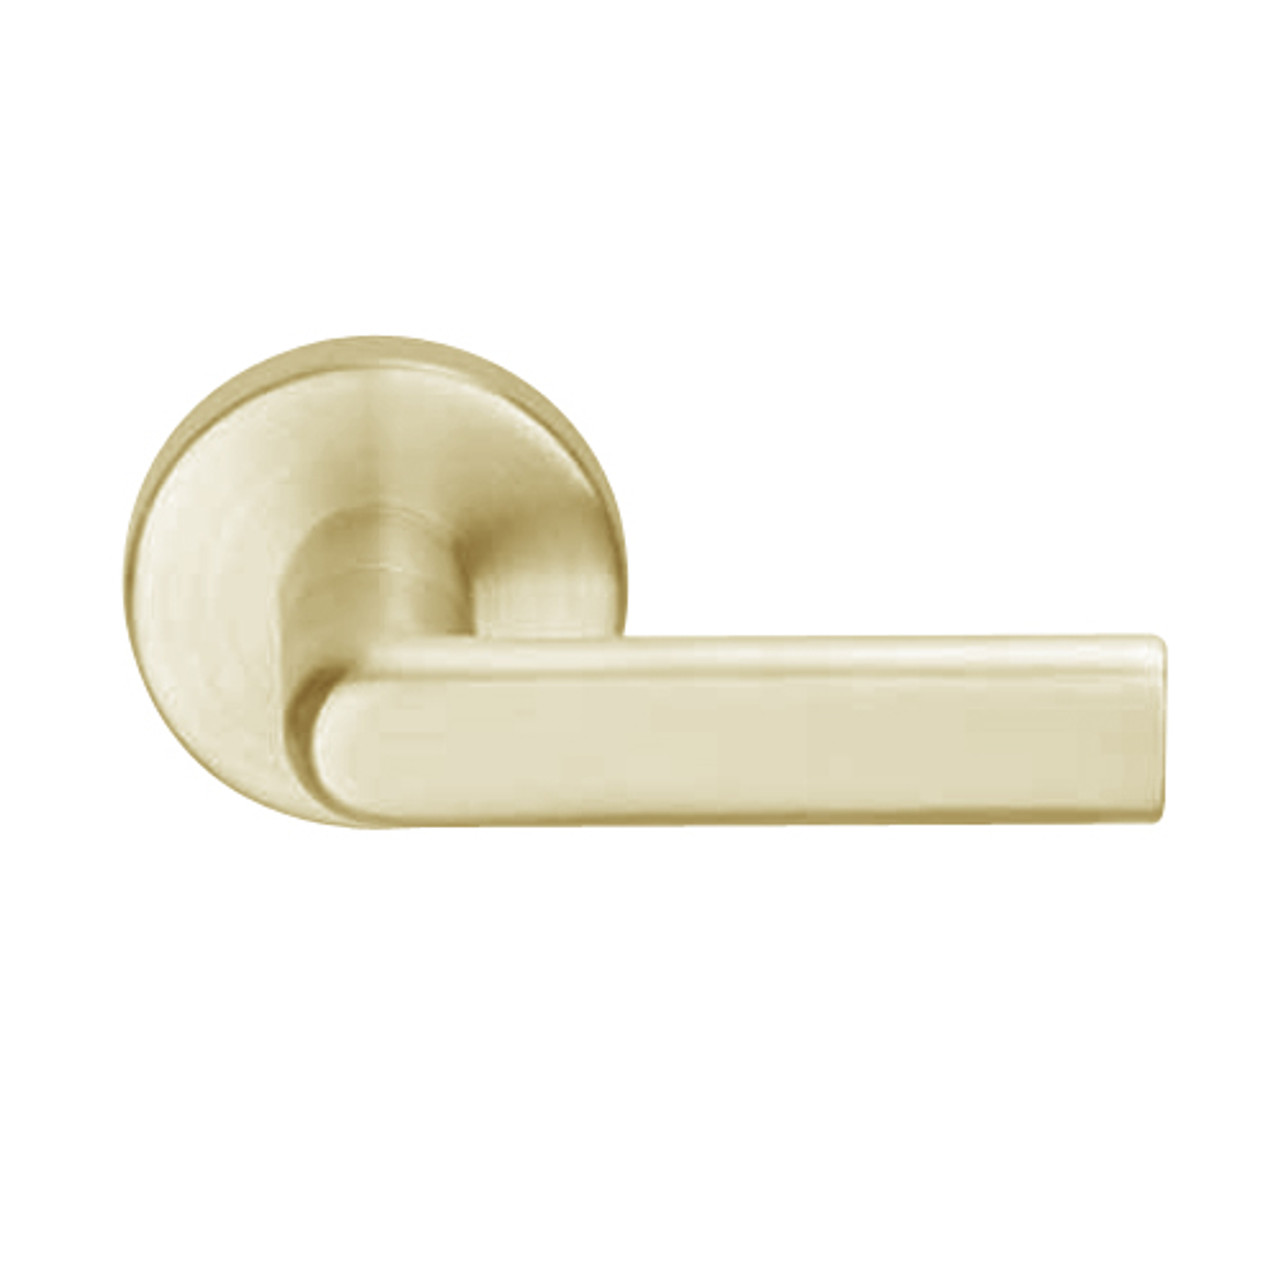 L9456BD-01B-606 Schlage L Series Corridor with Deadbolt Commercial Mortise Lock with 01 Cast Lever Design Prepped for SFIC in Satin Brass